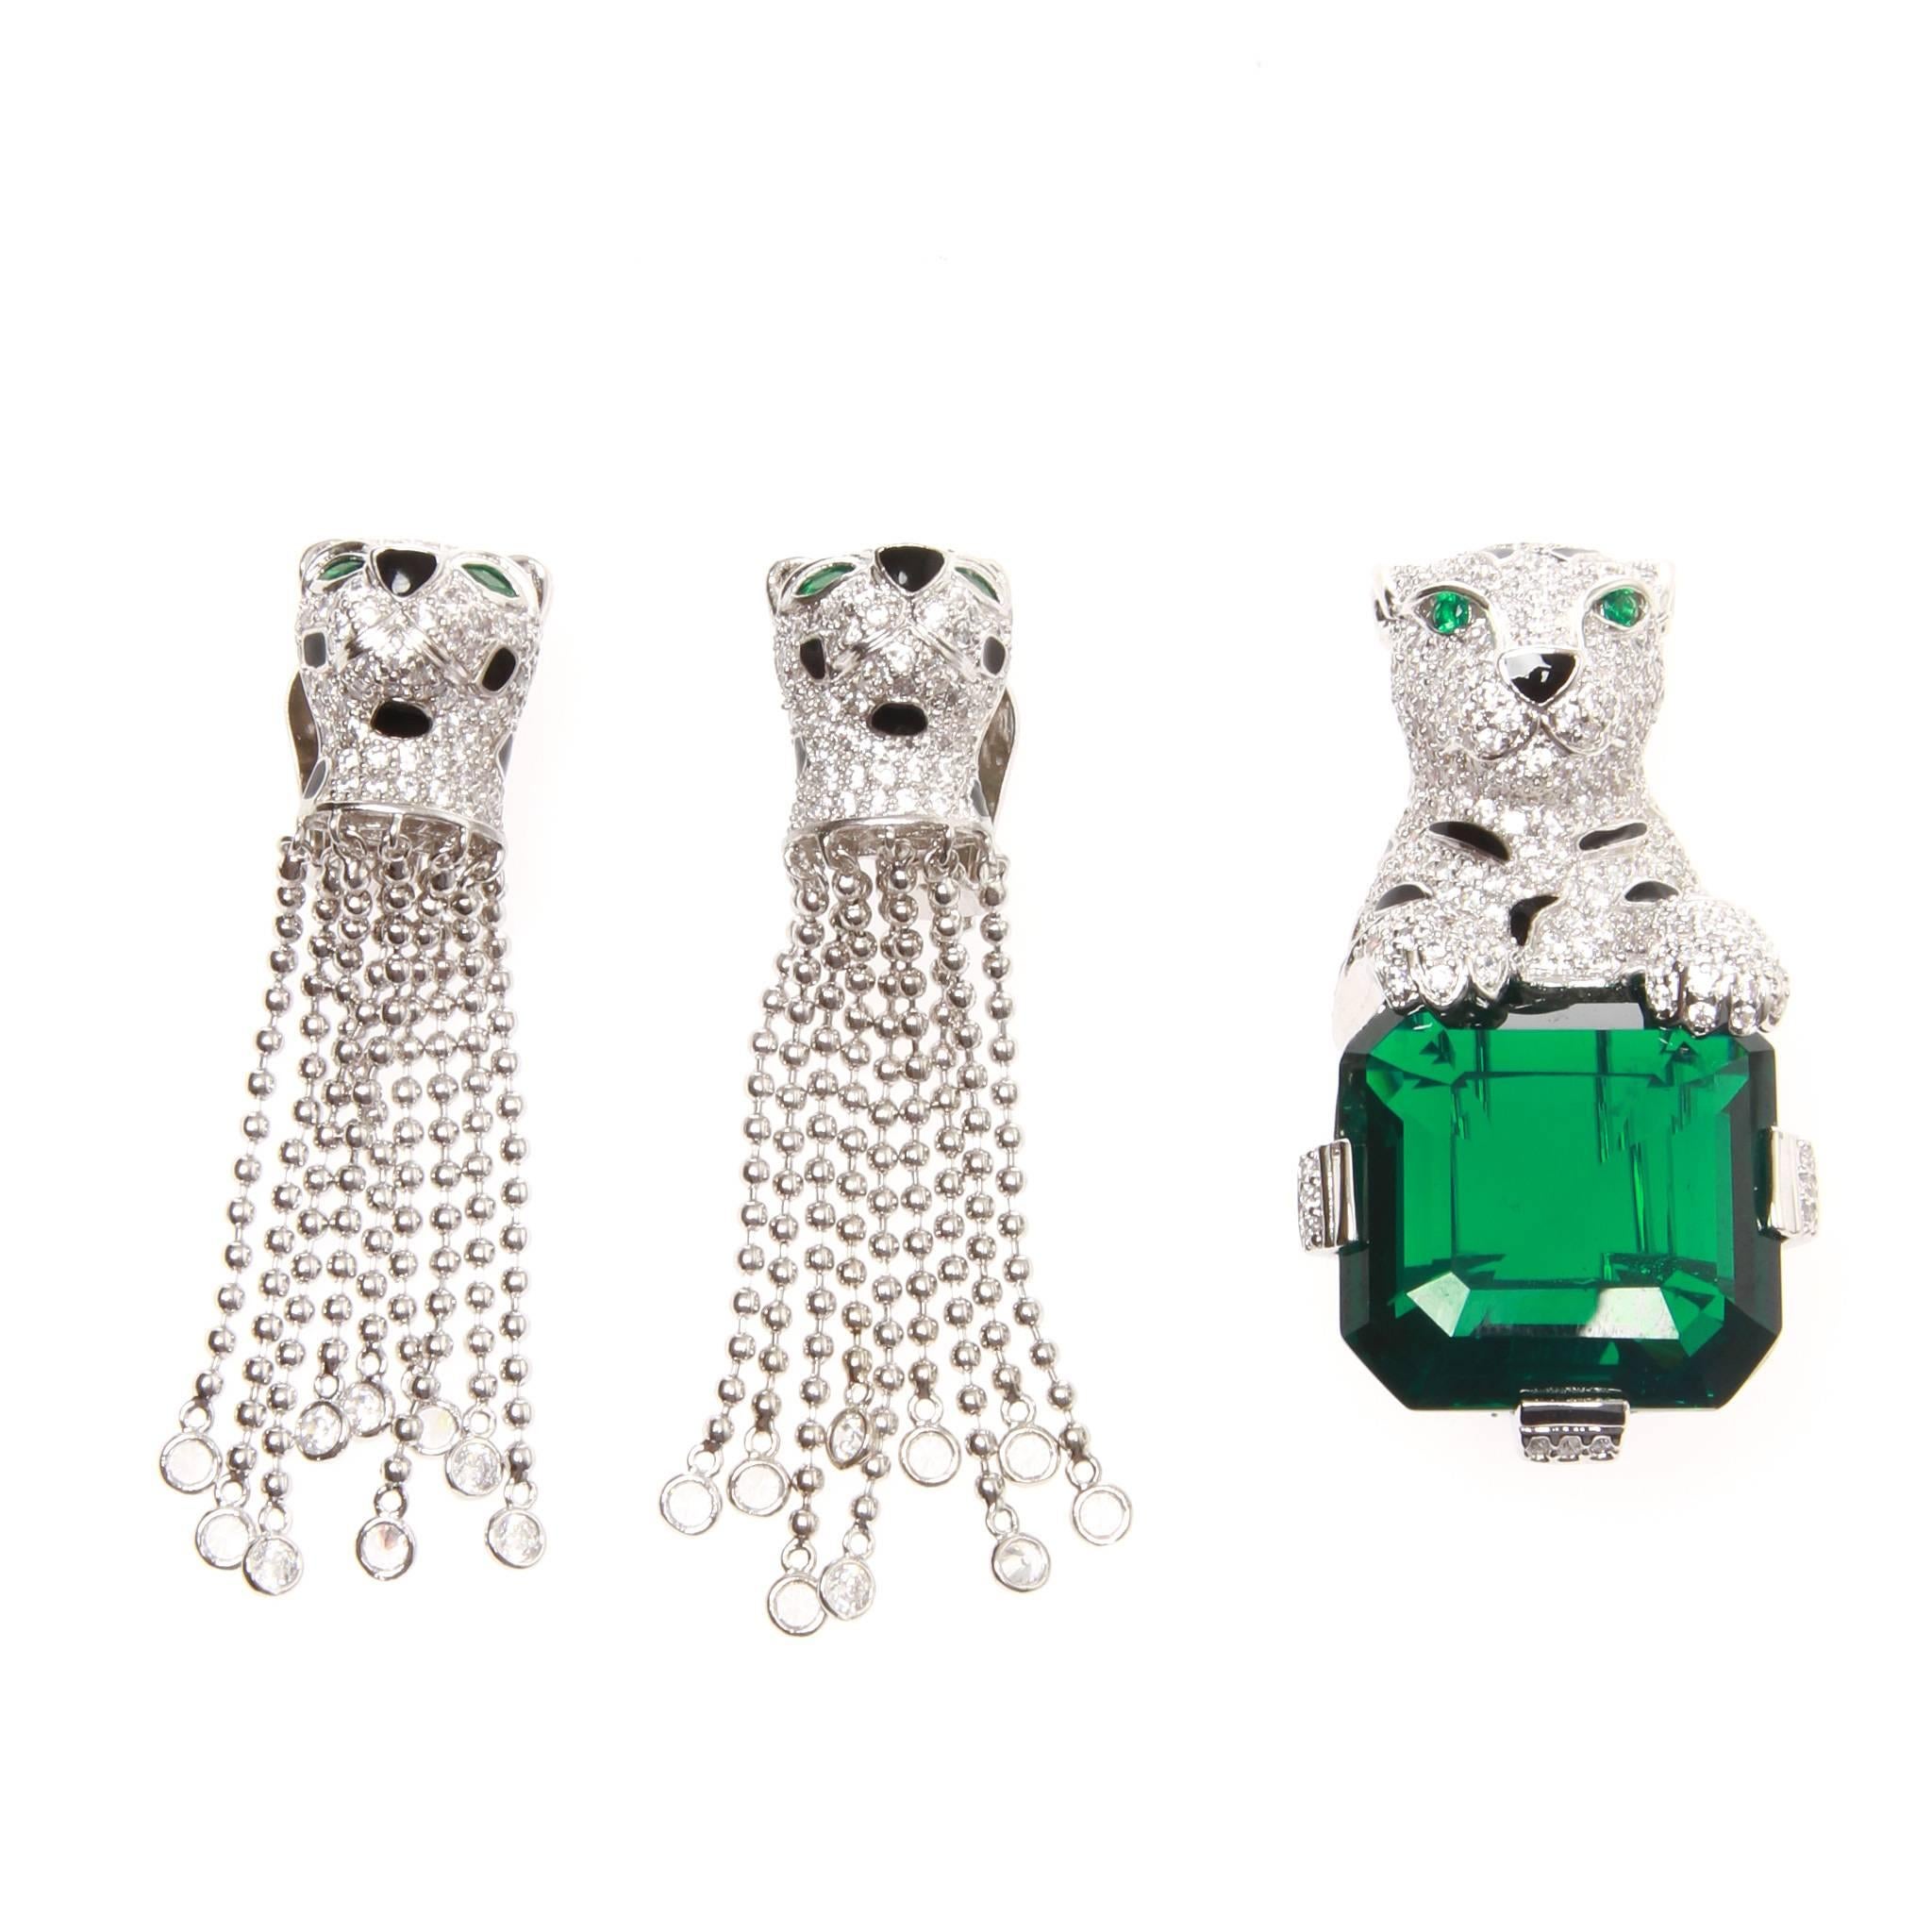 Jarin Sterling Silver Leopard Earring and Brooch Set